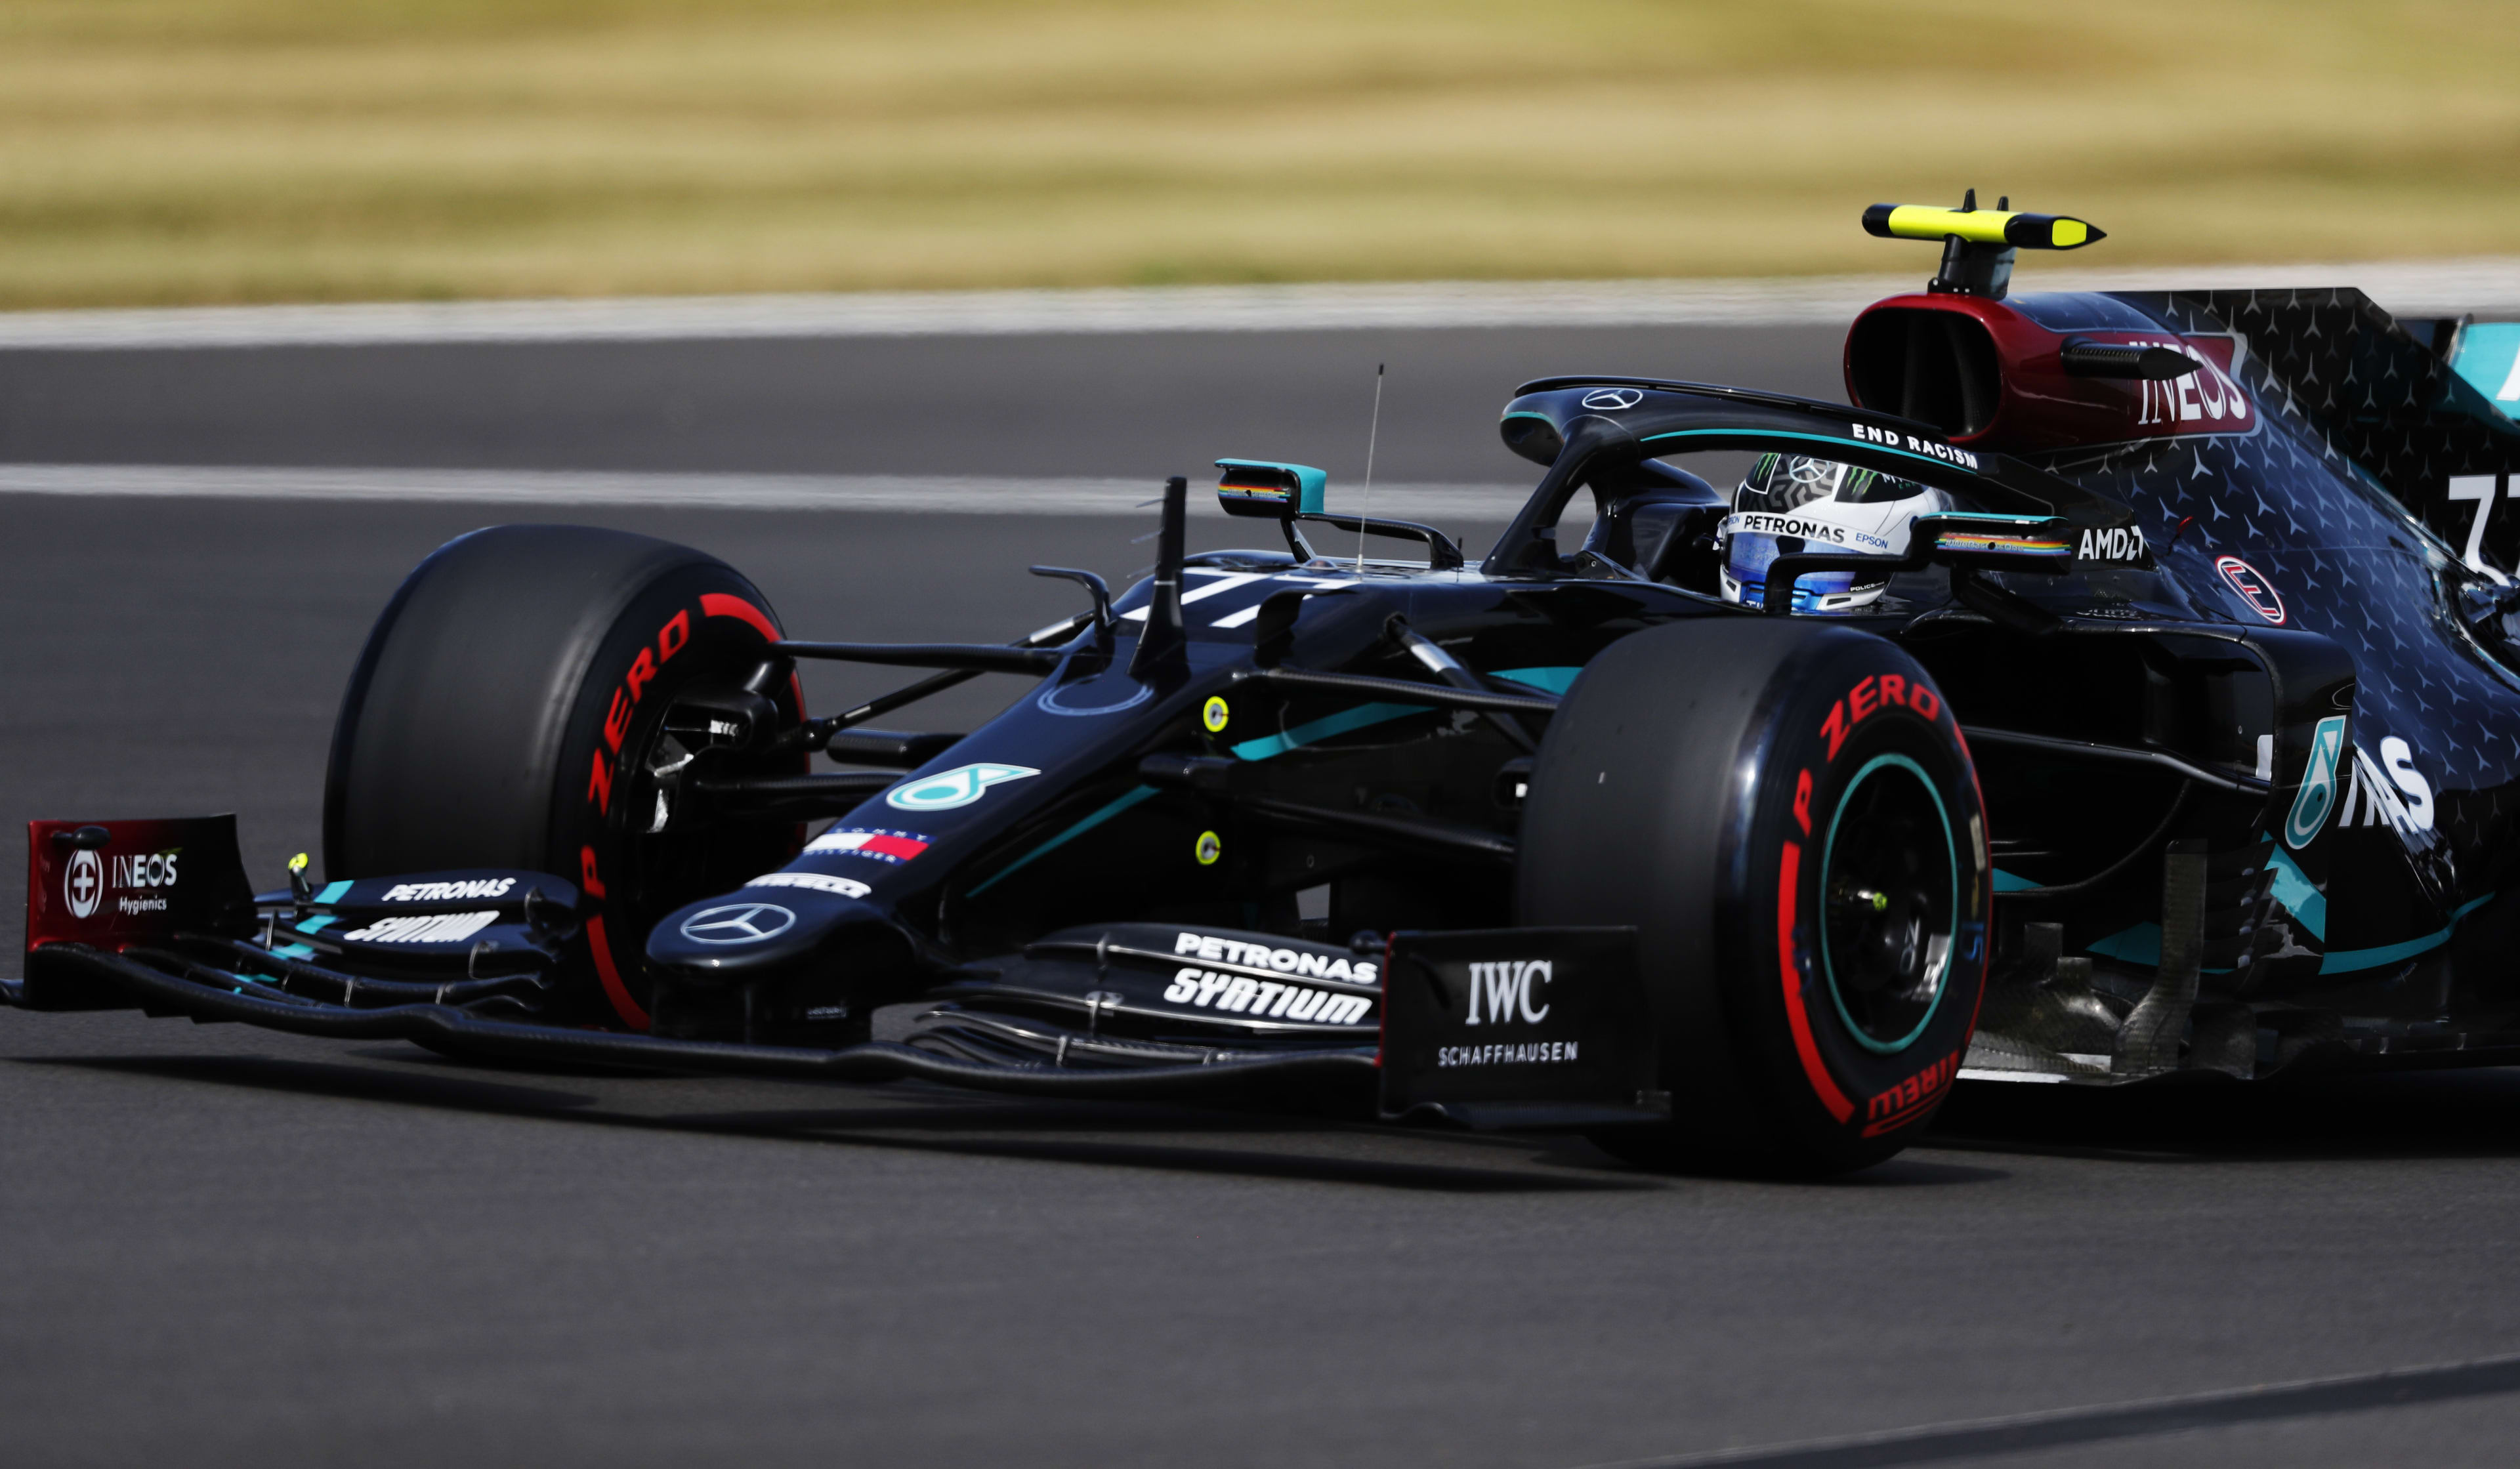 LIVE COVERAGE - Qualifying from Silverstone | Formula 1®